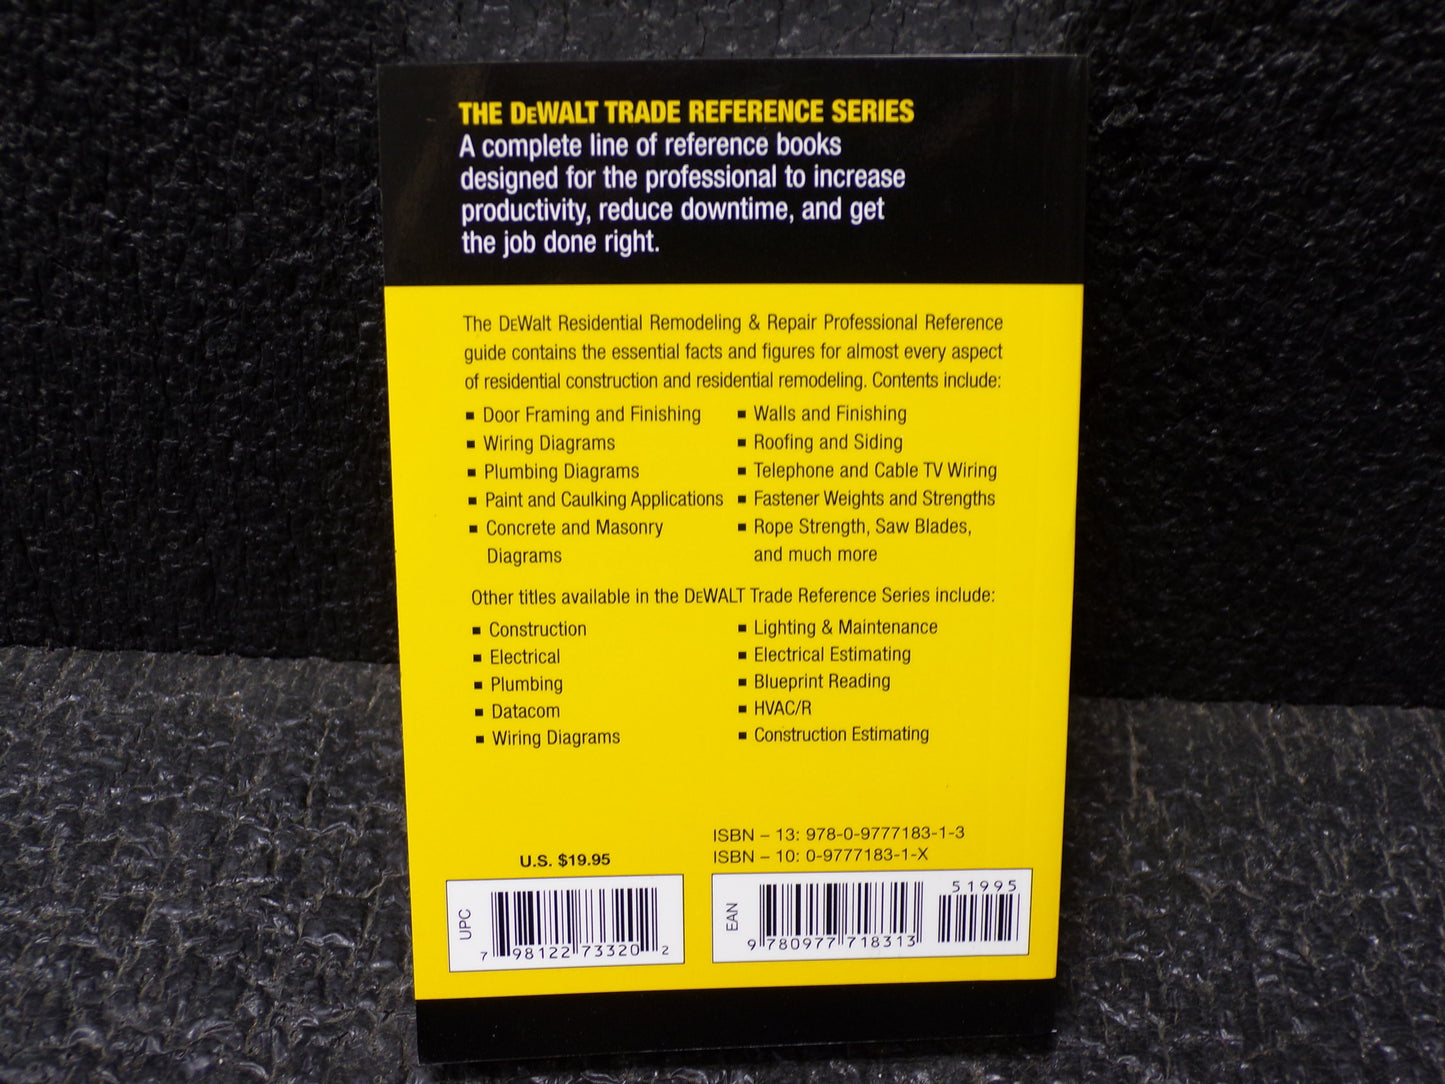 DeWalt RESIDENTIAL REMODELING AND REPAIR PROFESSIONAL REFERENCE (CR00094-BT23)